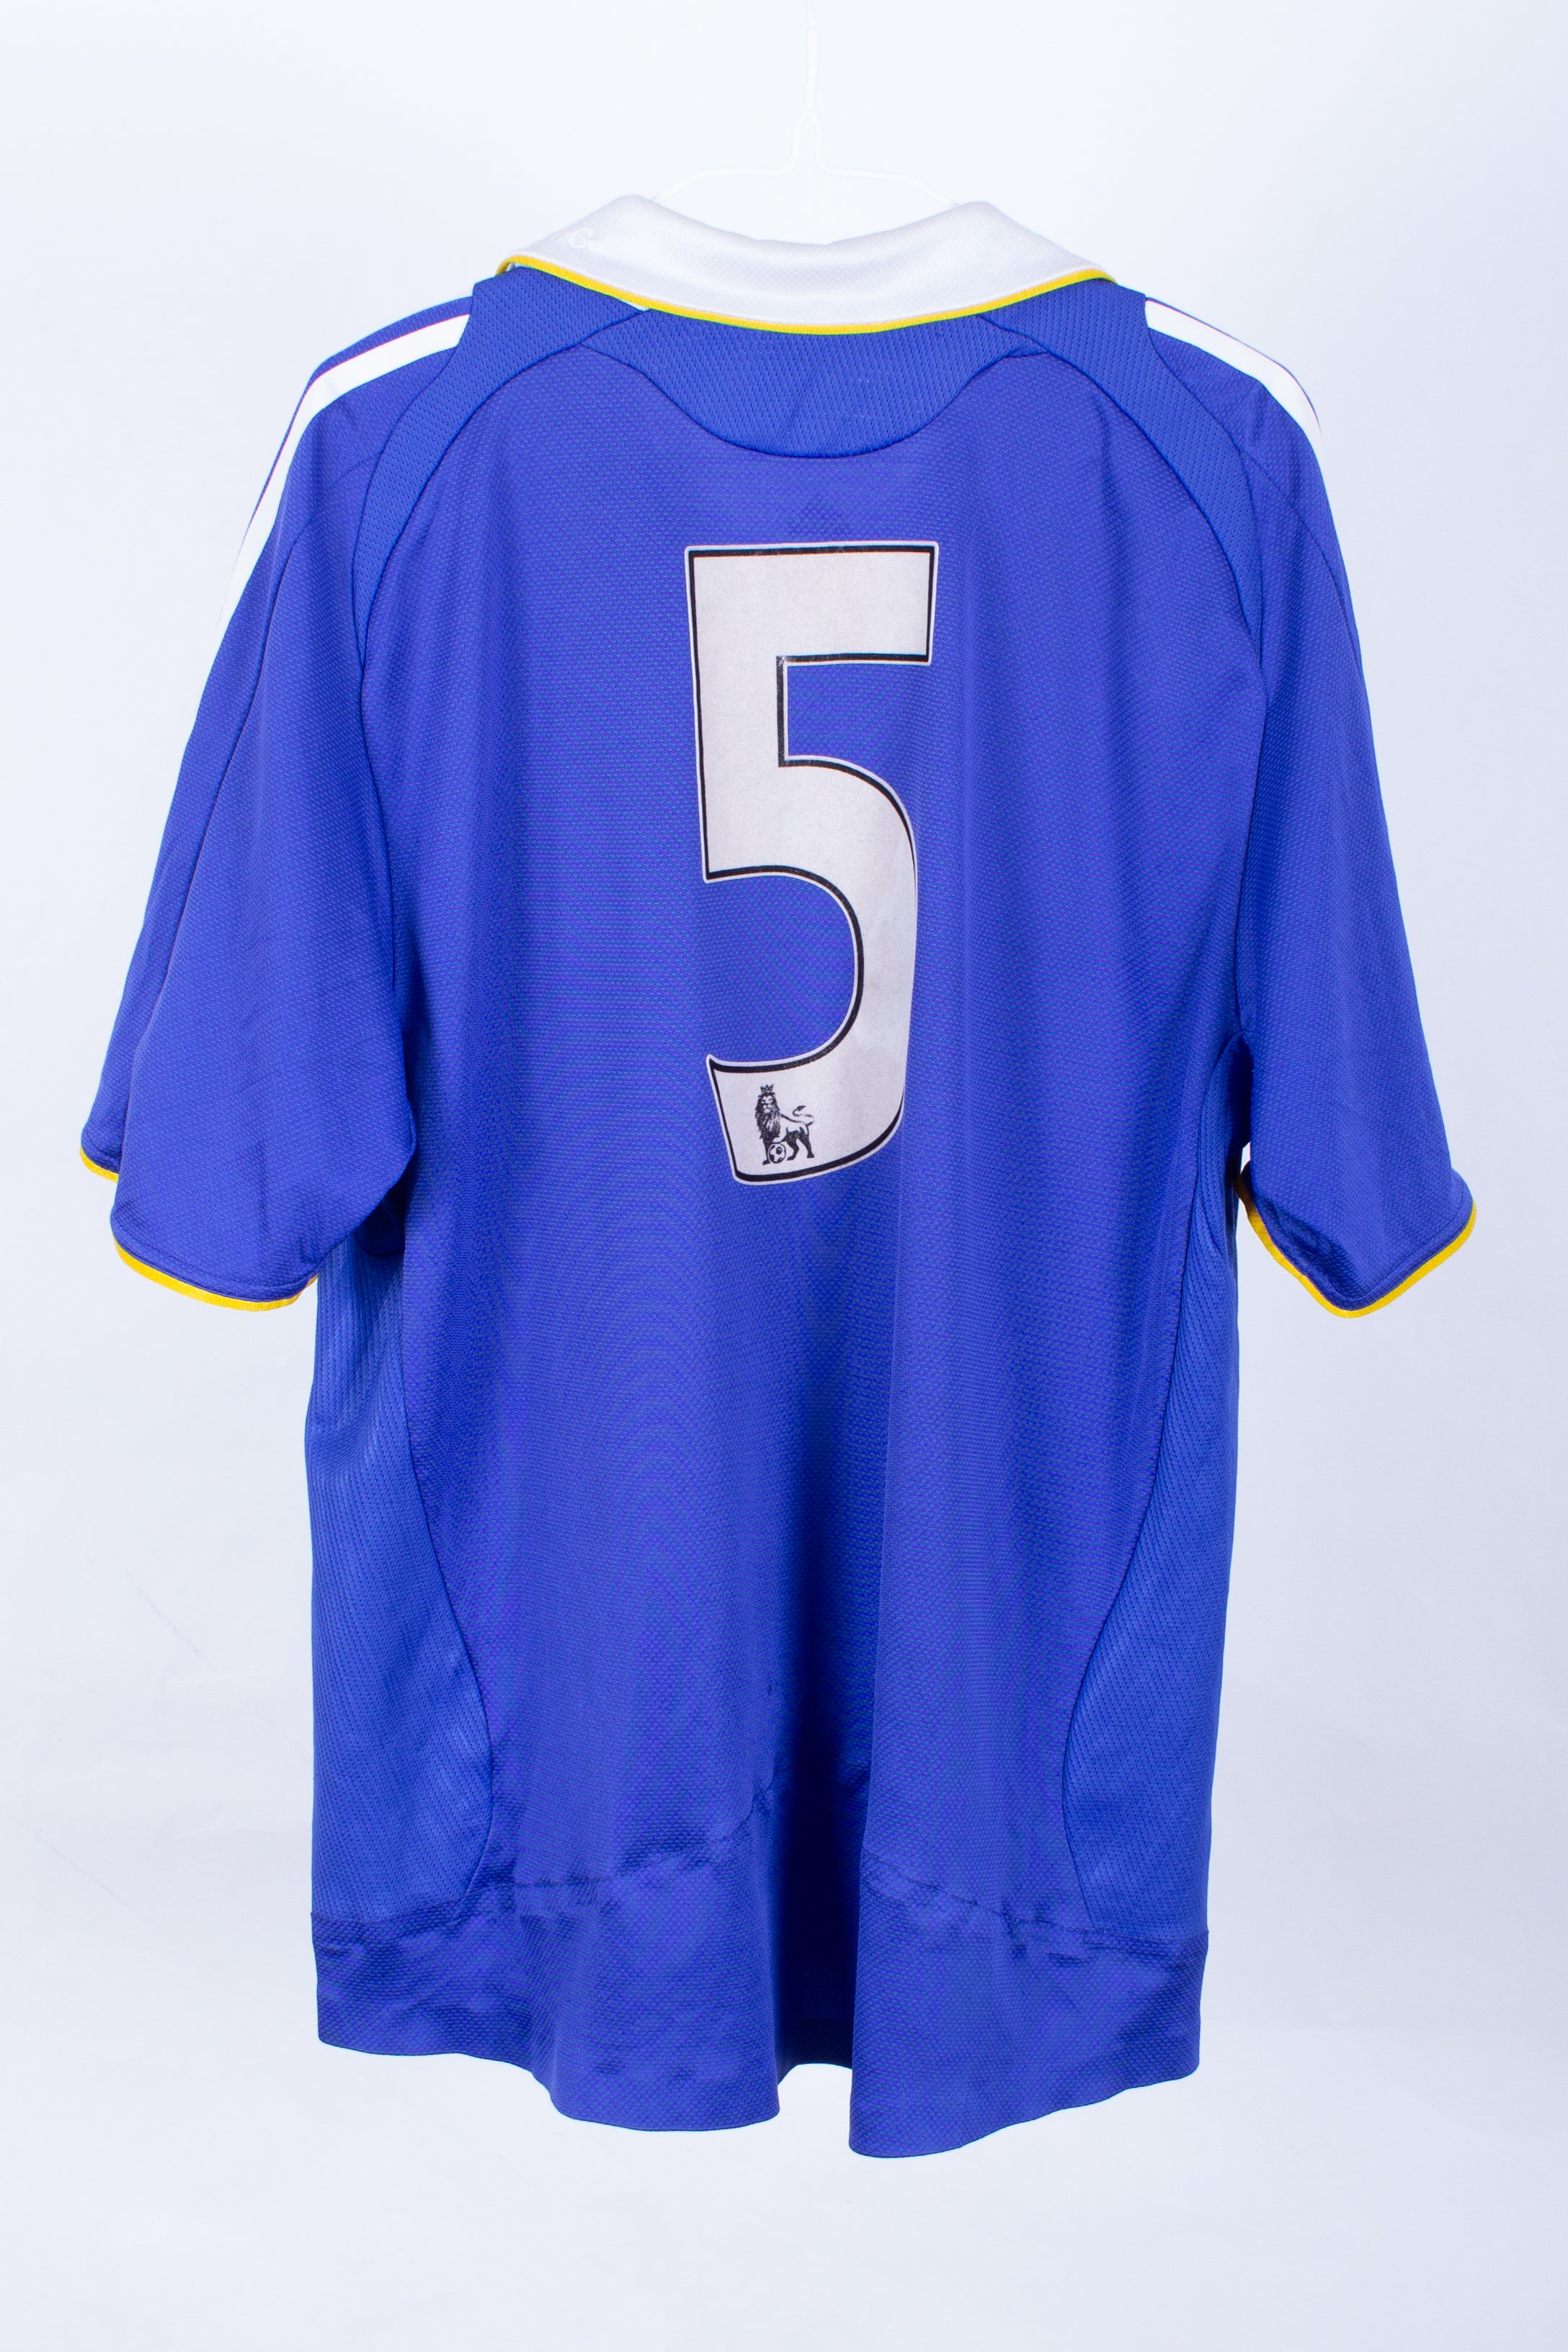 Chelsea 2008/09 *Player Issue* Home Shirt (#5) (L)